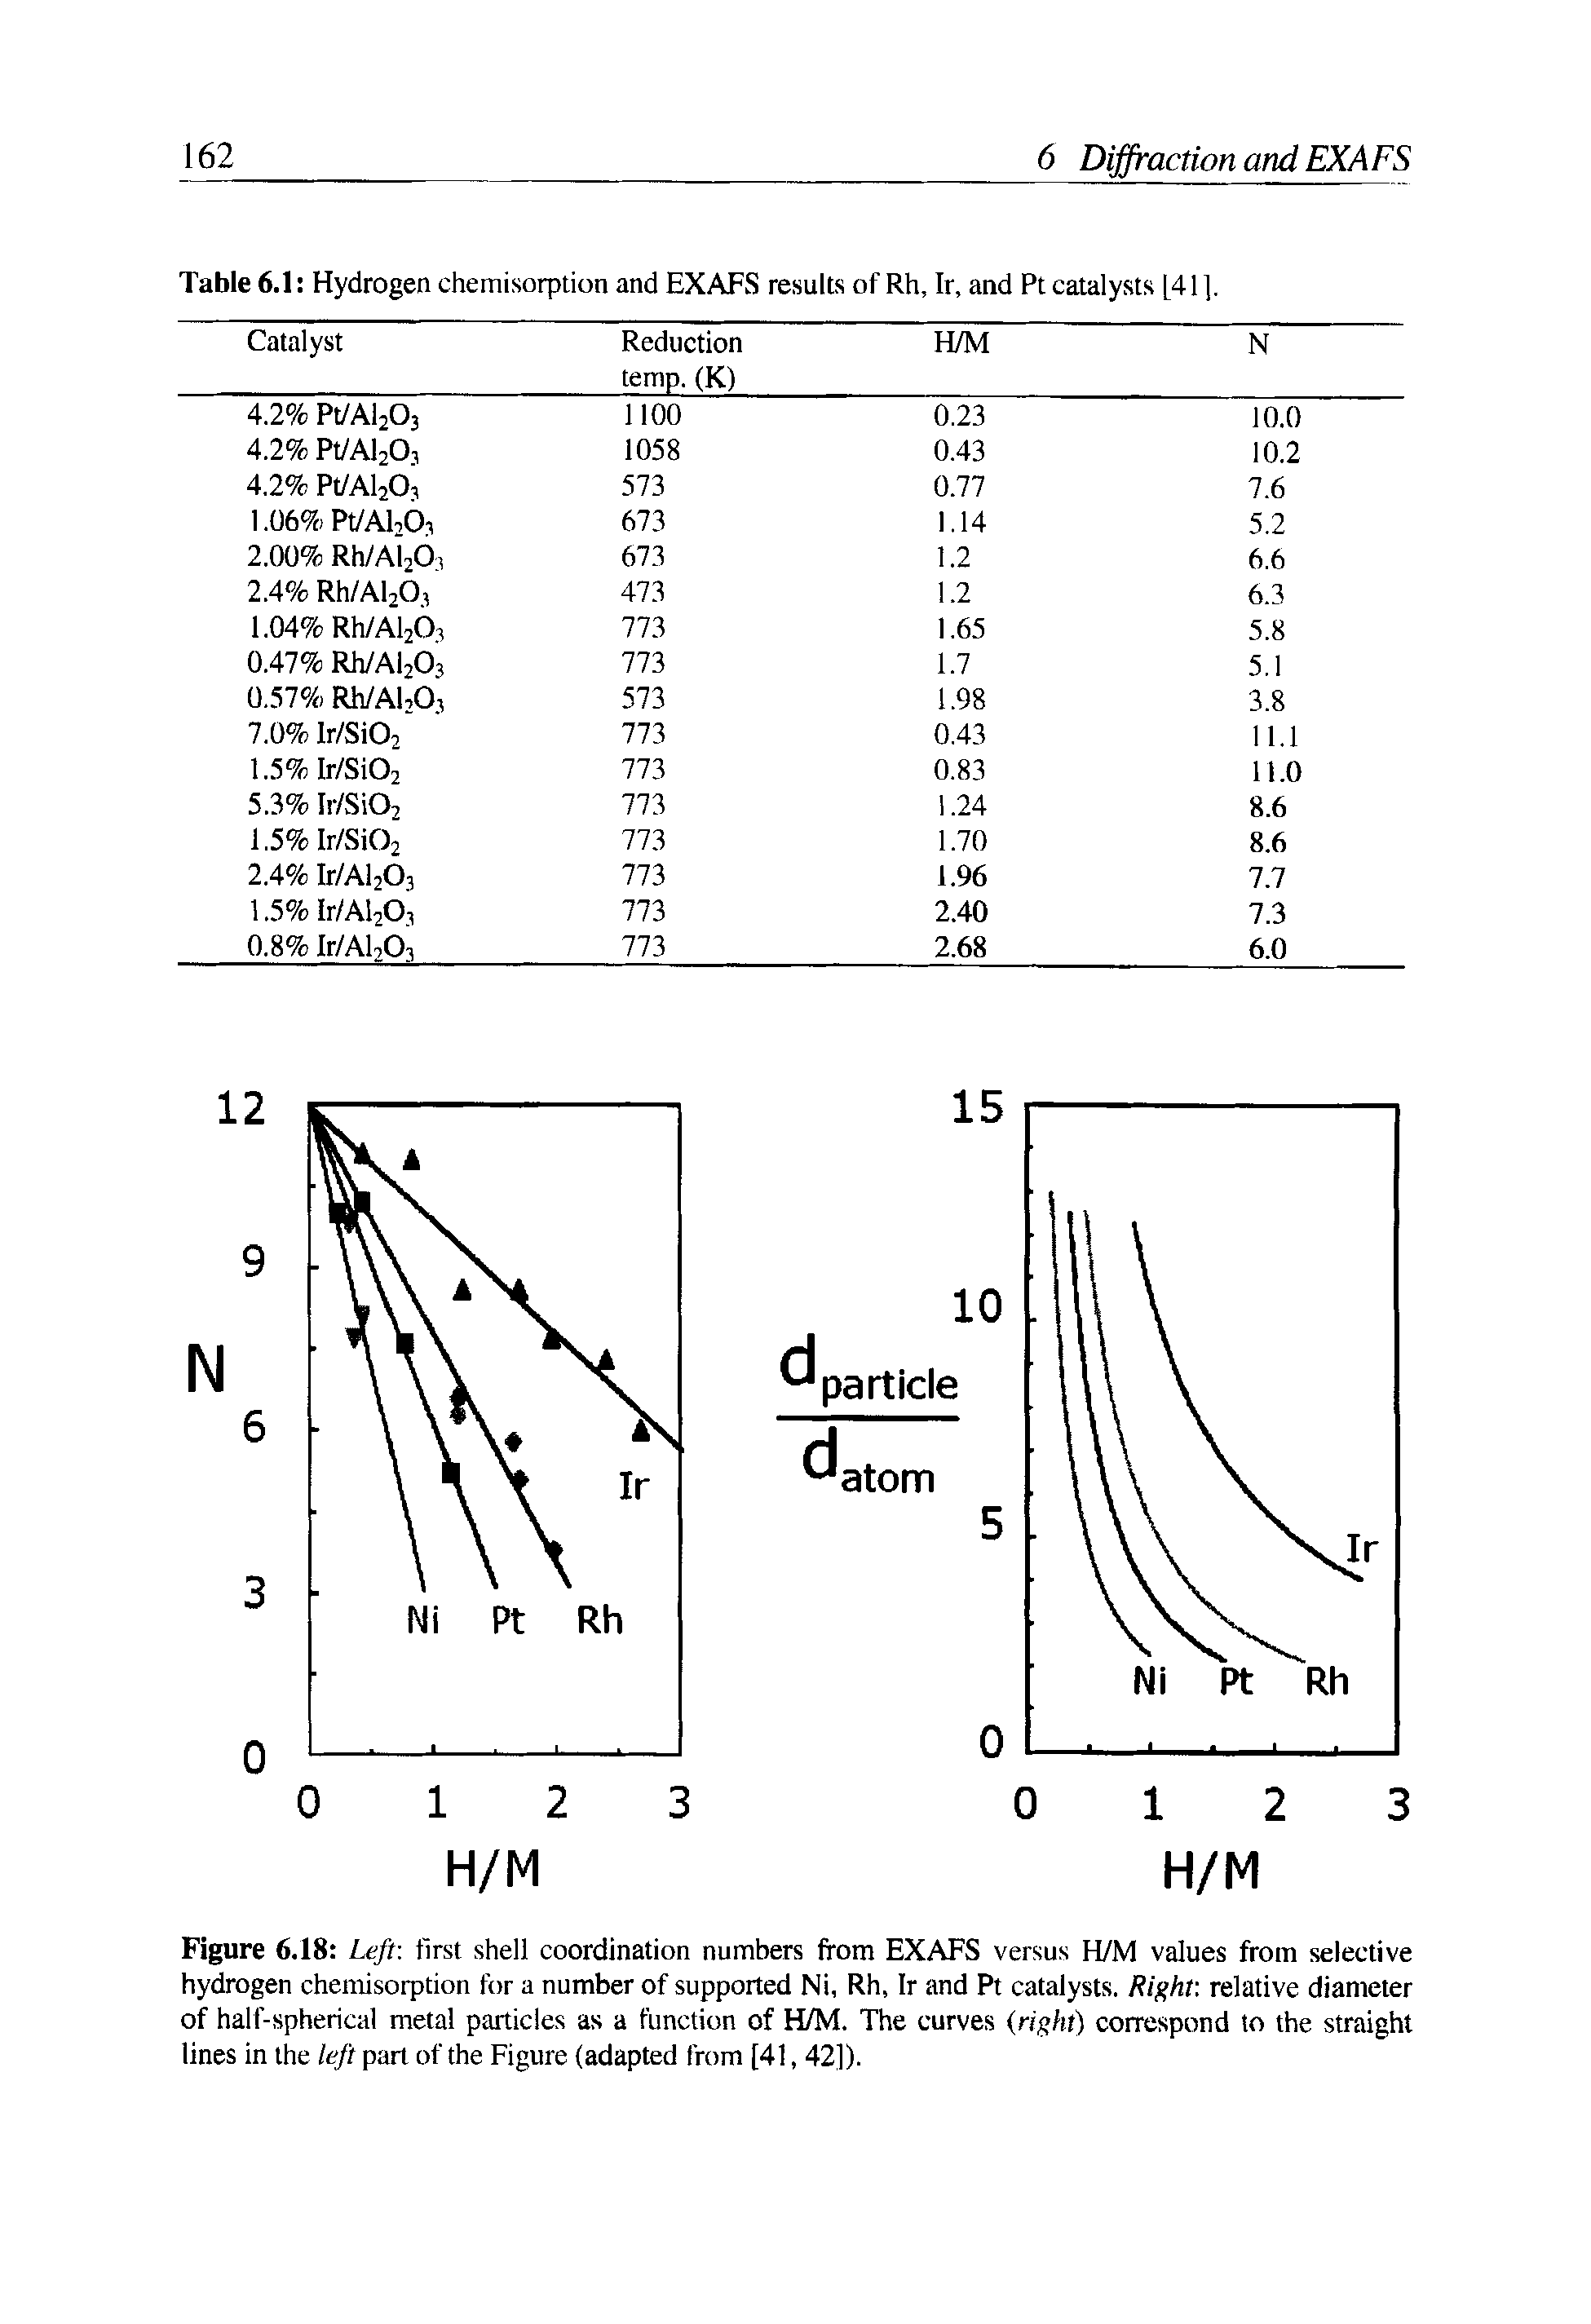 Figure 6.18 Left first shell coordination numbers from EXAFS versus H/M values from selective hydrogen chemisorption for a number of supported Ni, Rh, Ir and Pt catalysts. Right, relative diameter of half-spherical metal particles as a function of H/M. The curves (right) correspond to the straight lines in the left part of the Figure (adapted from [41,42[).